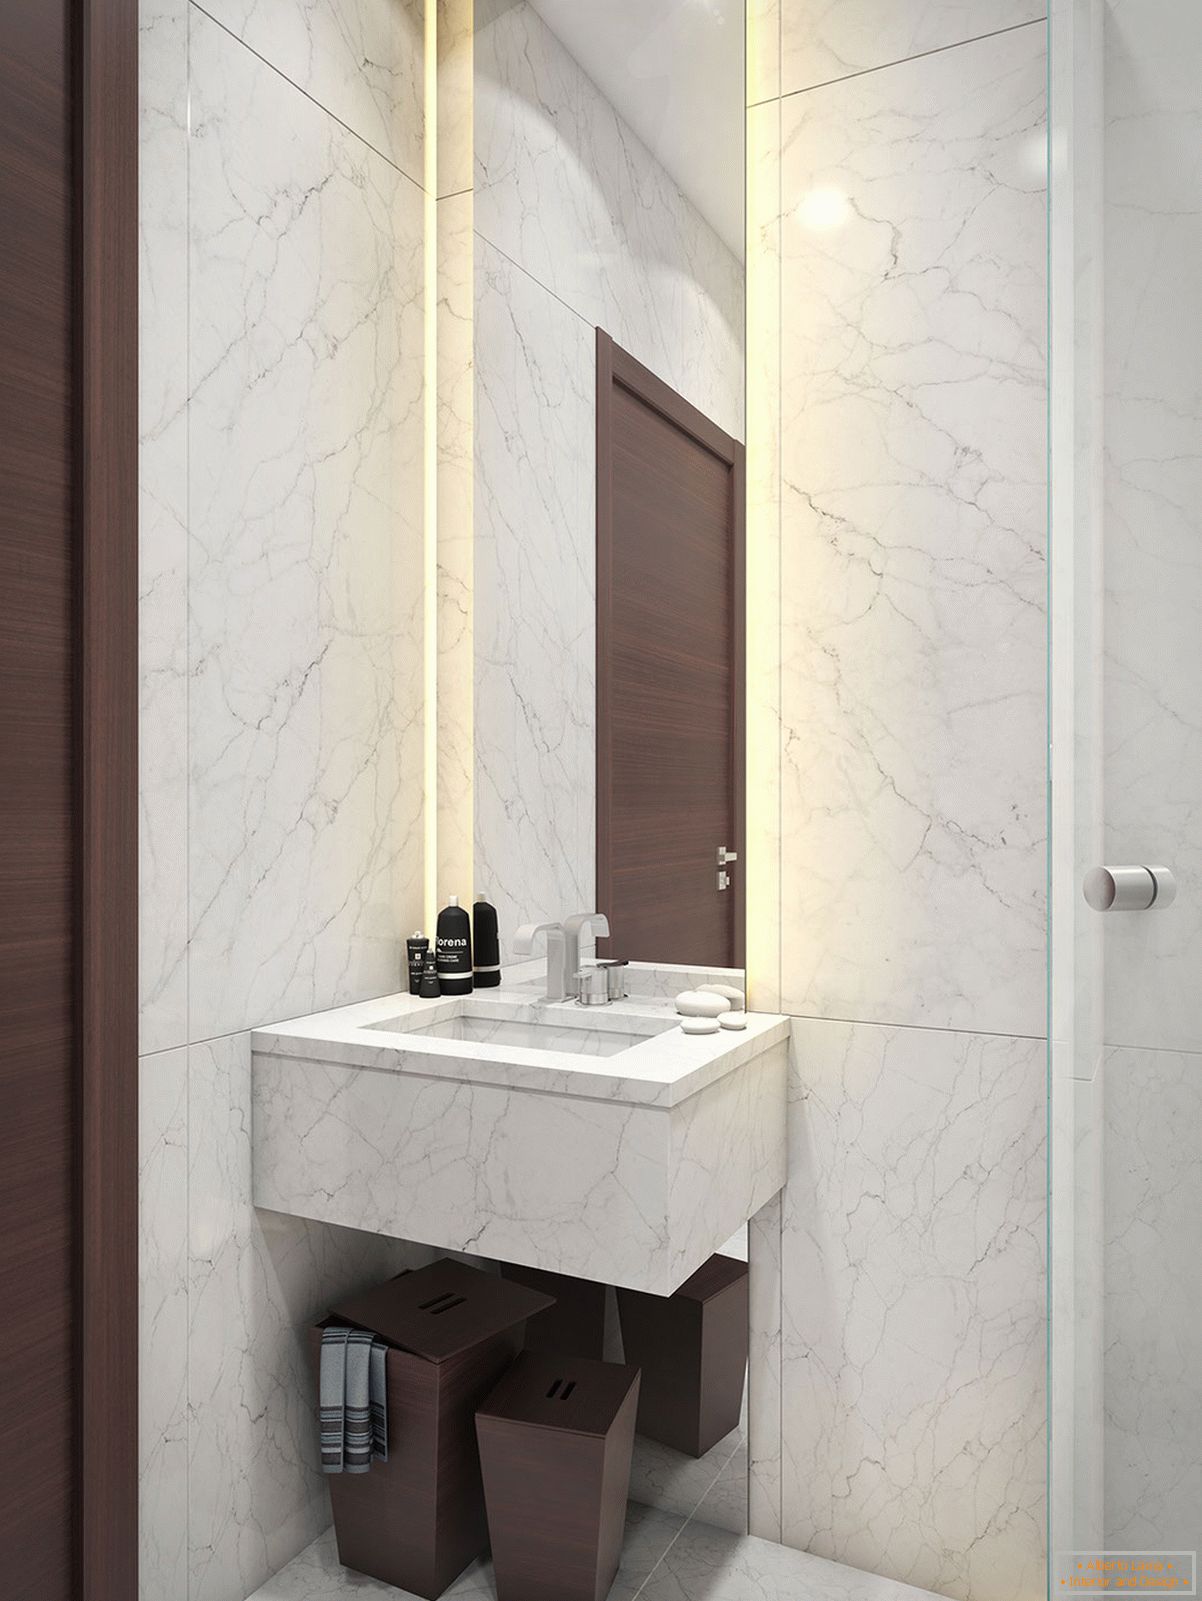 Marble in the bathroom